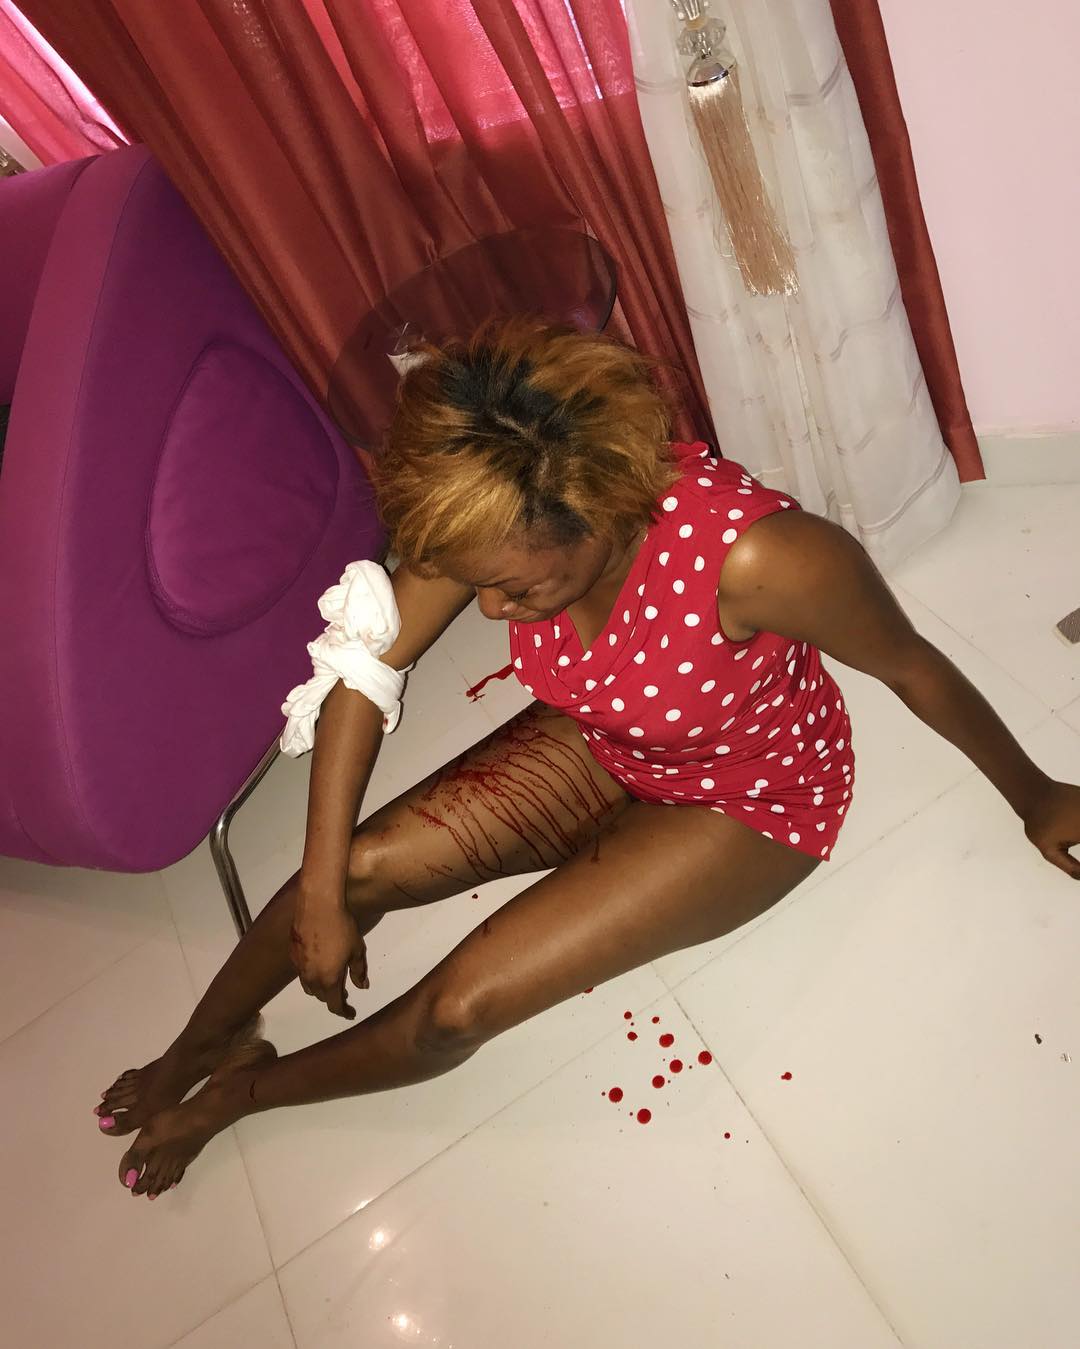 Patoranking's Record Label Owner Fuston Allegedly Beats Up Wife Till She Bleeds But She Quickly Calls Him Out After He Went On Instagram To Share Motivational Quote